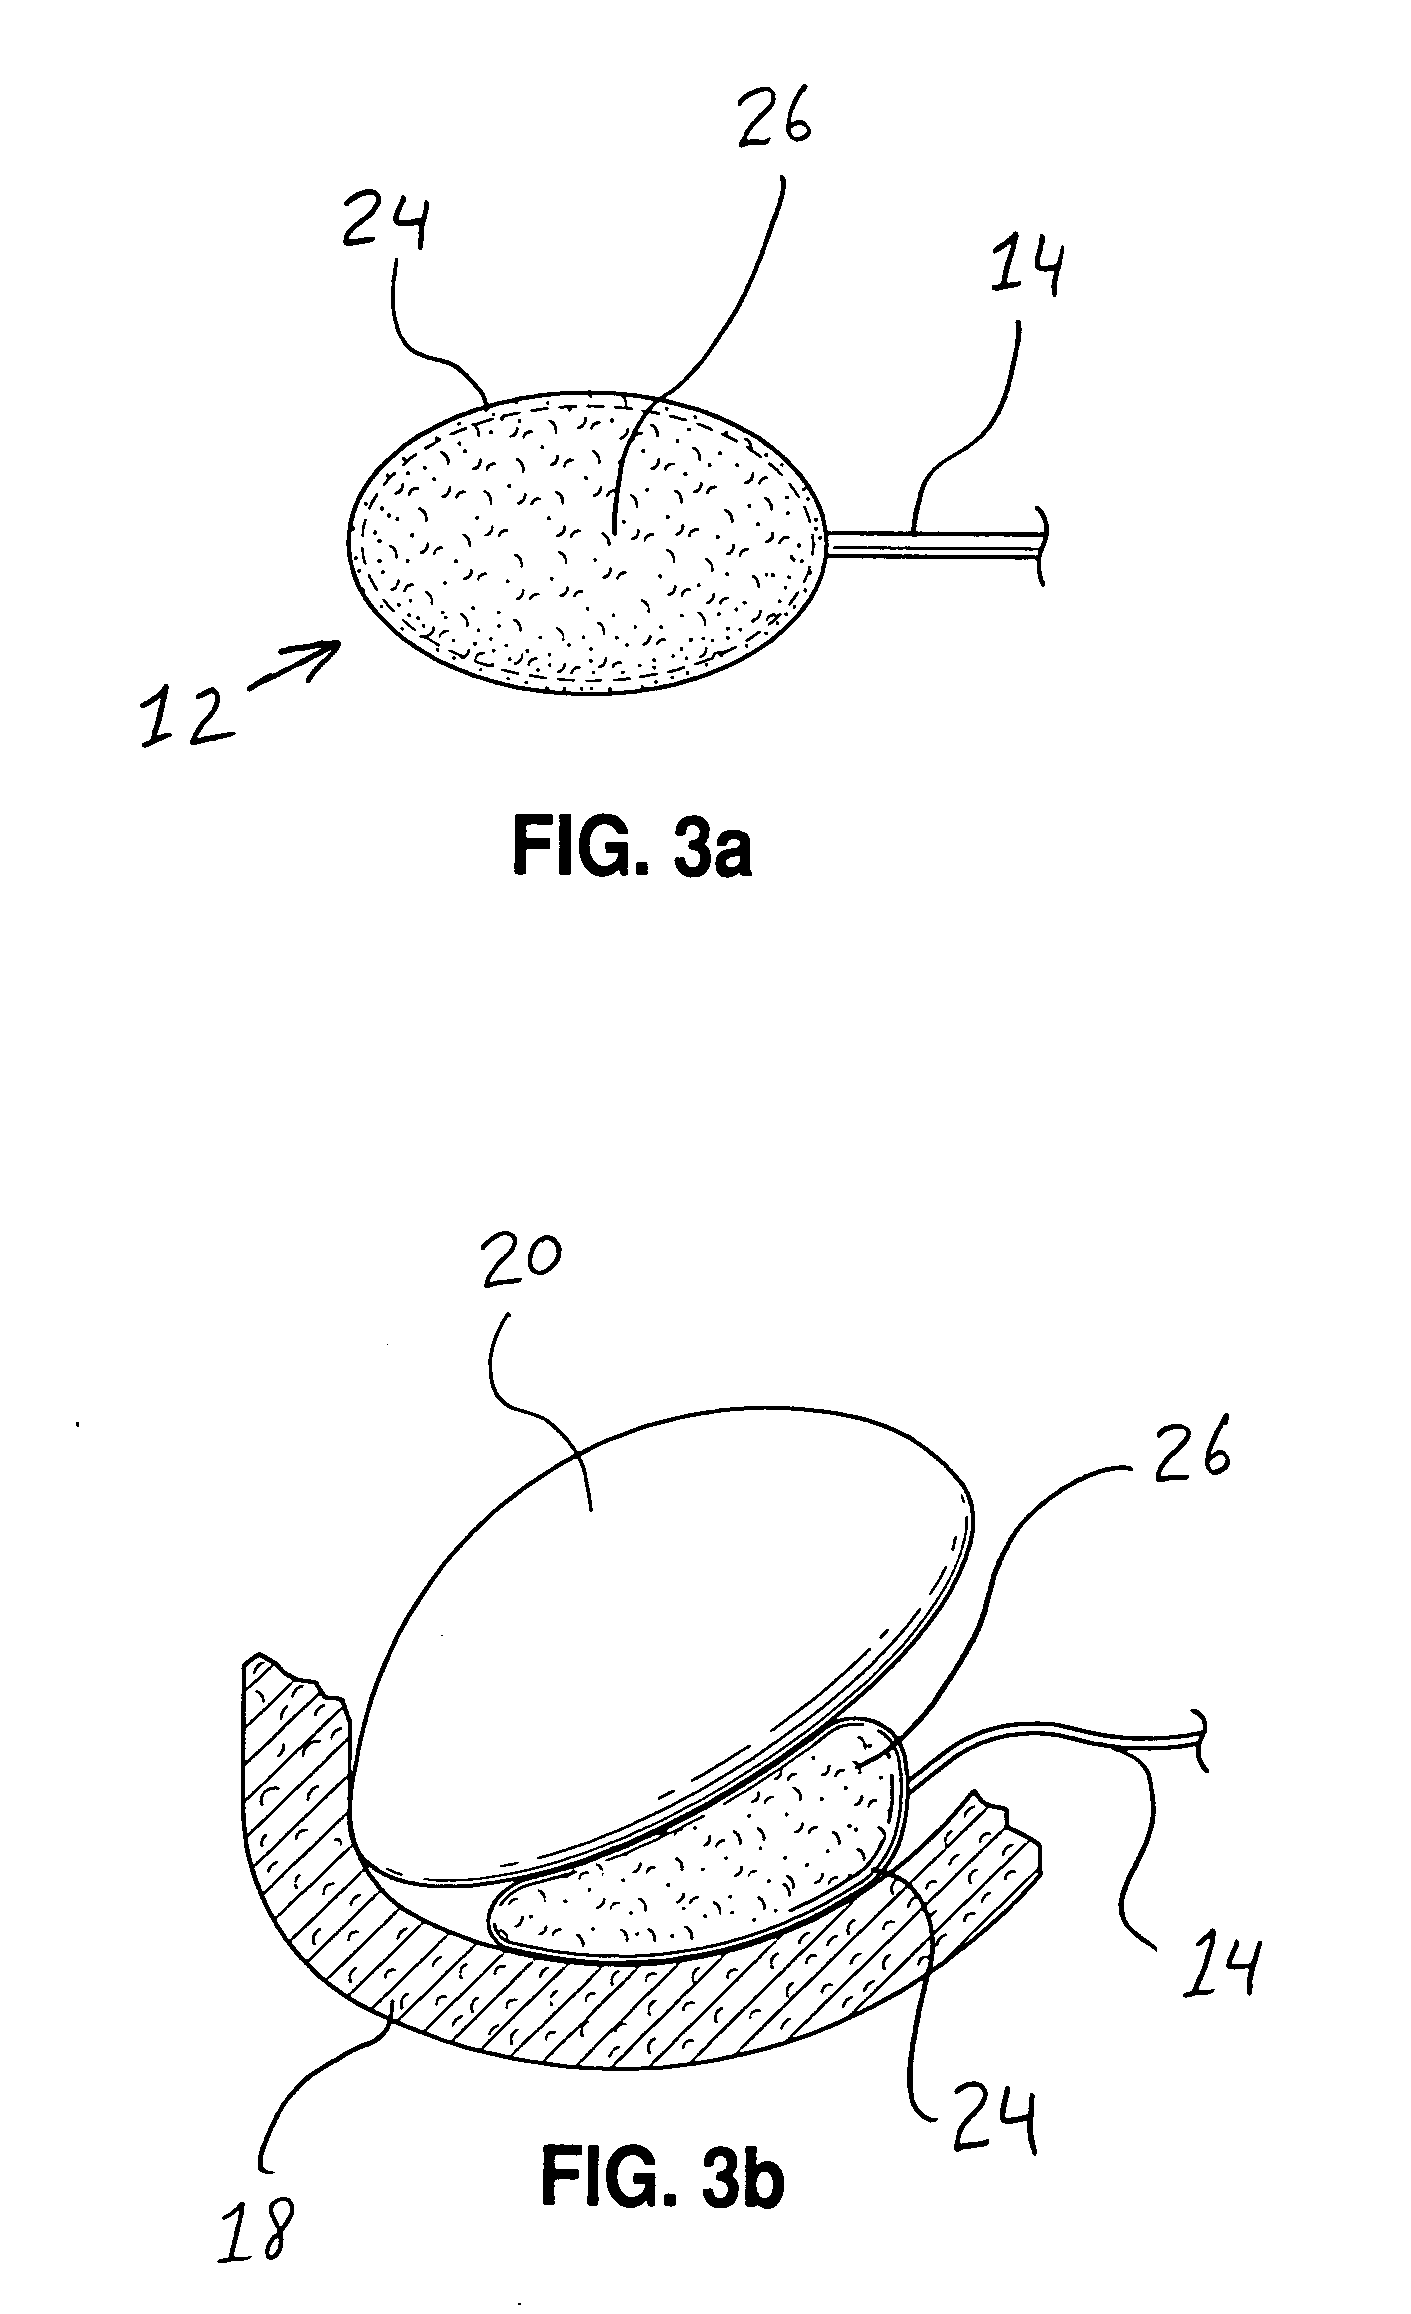 Systems and methods for determining pressure and spacing relating to anatomical structures